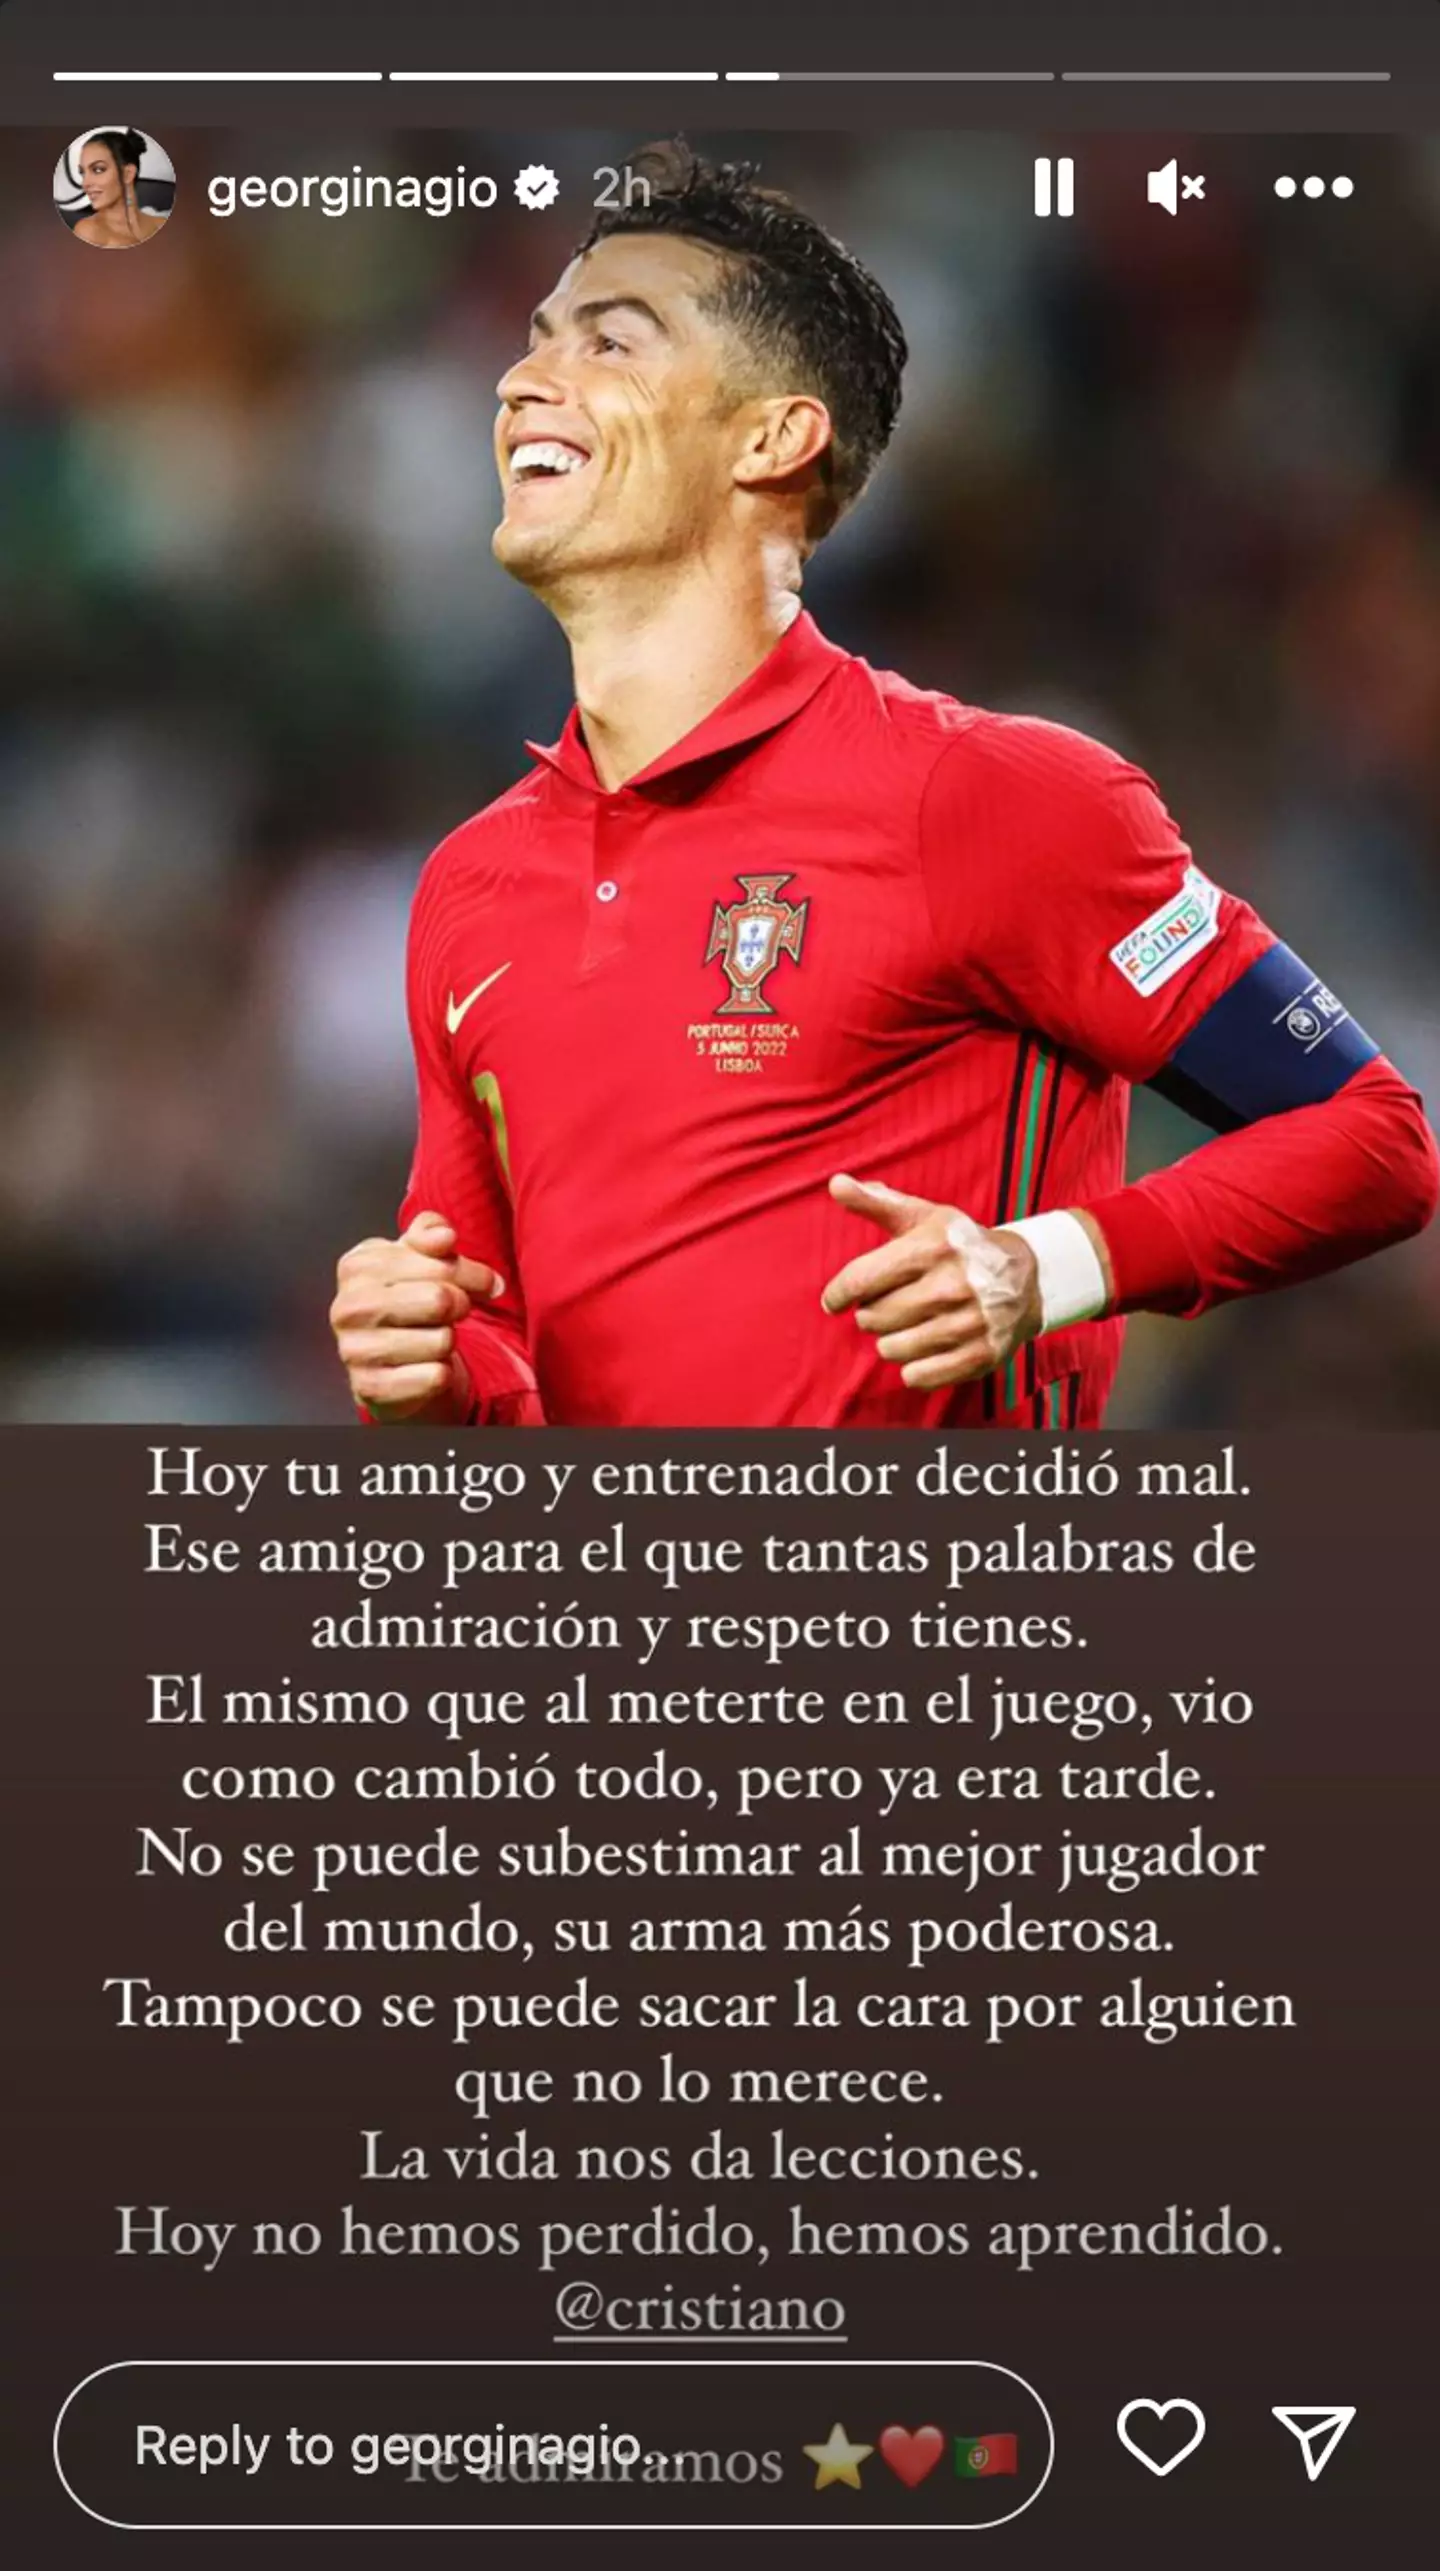 Cristiano Ronaldo’s partner, Georgina Rodriguez, speaks out against Fernando Santos after Portugal’s World Cup defeat to Morocco.